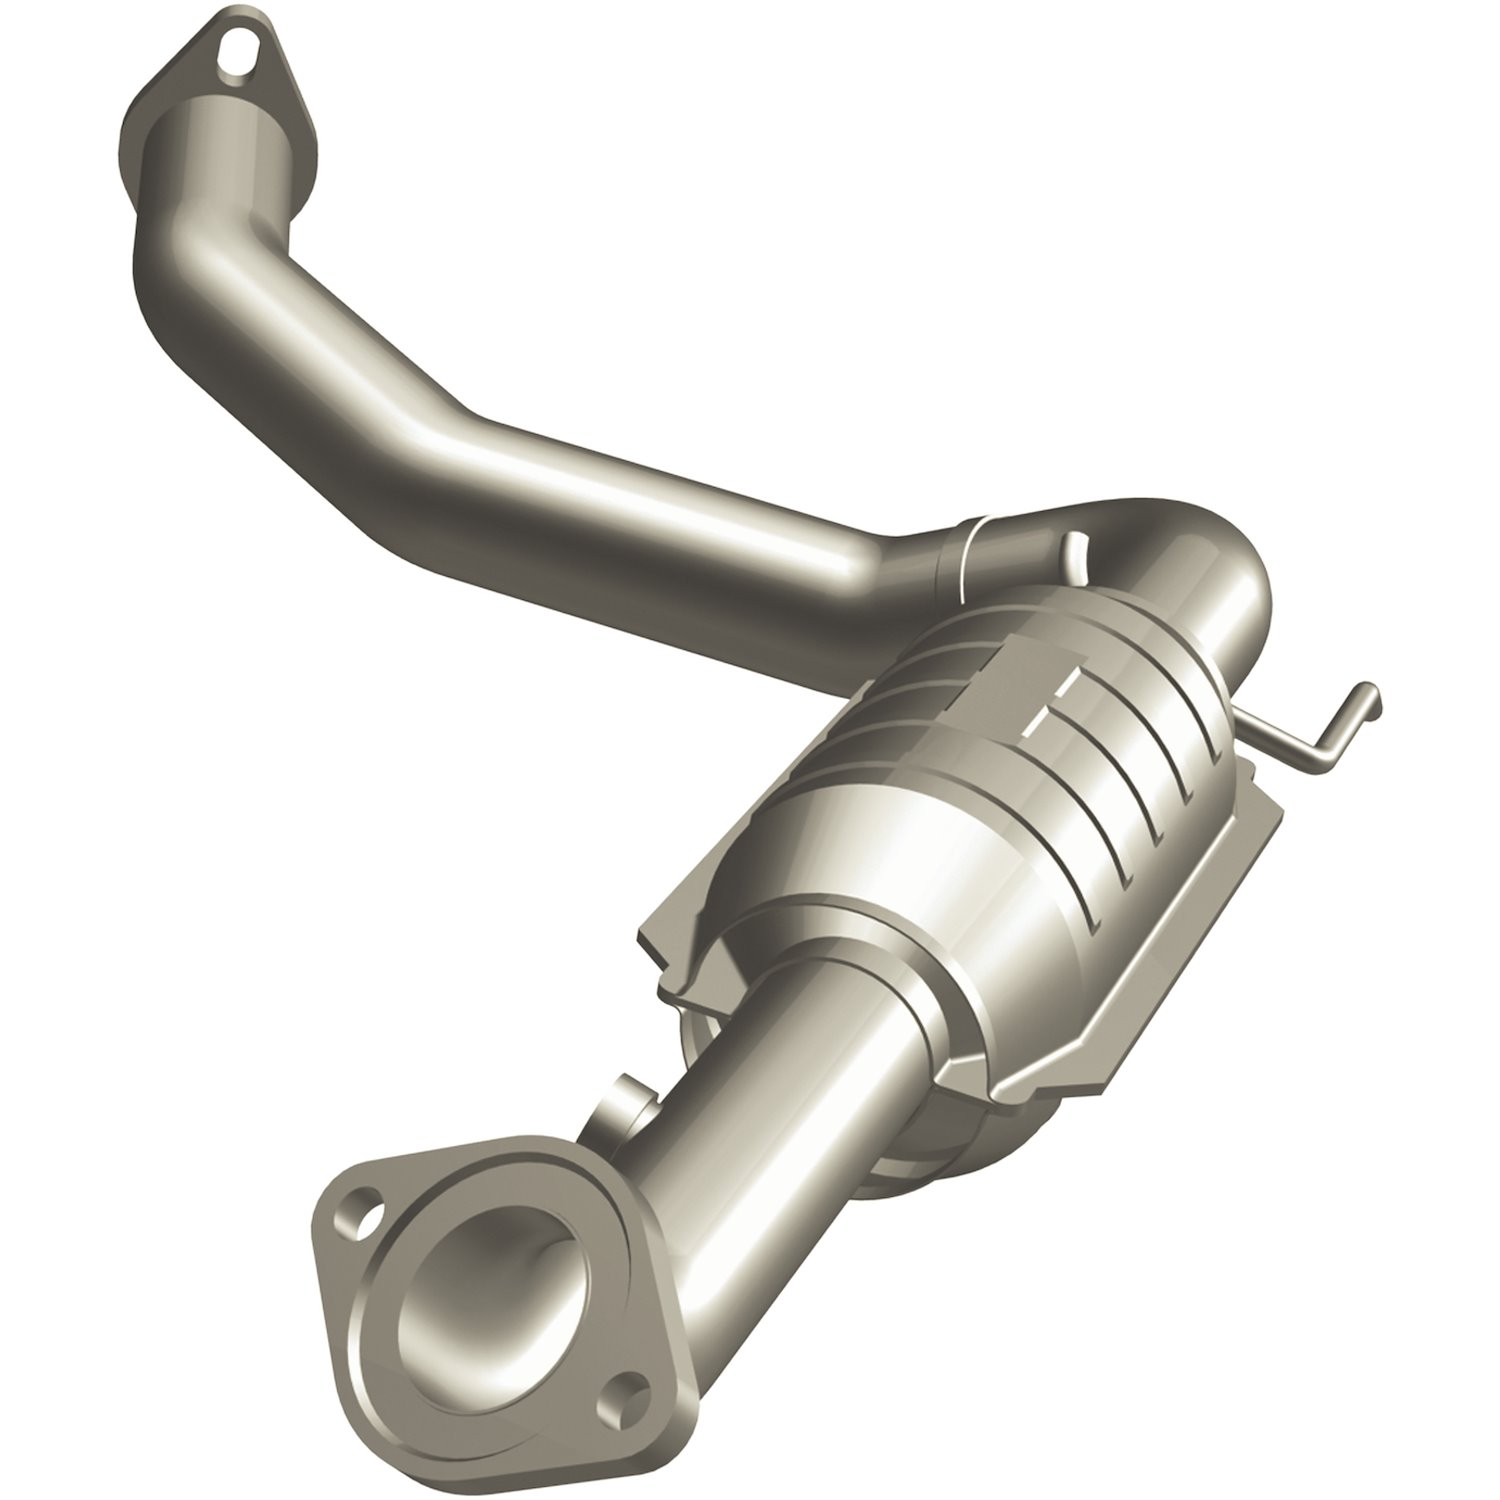 OEM Grade Federal / EPA Compliant Direct-Fit Catalytic Converter 49697